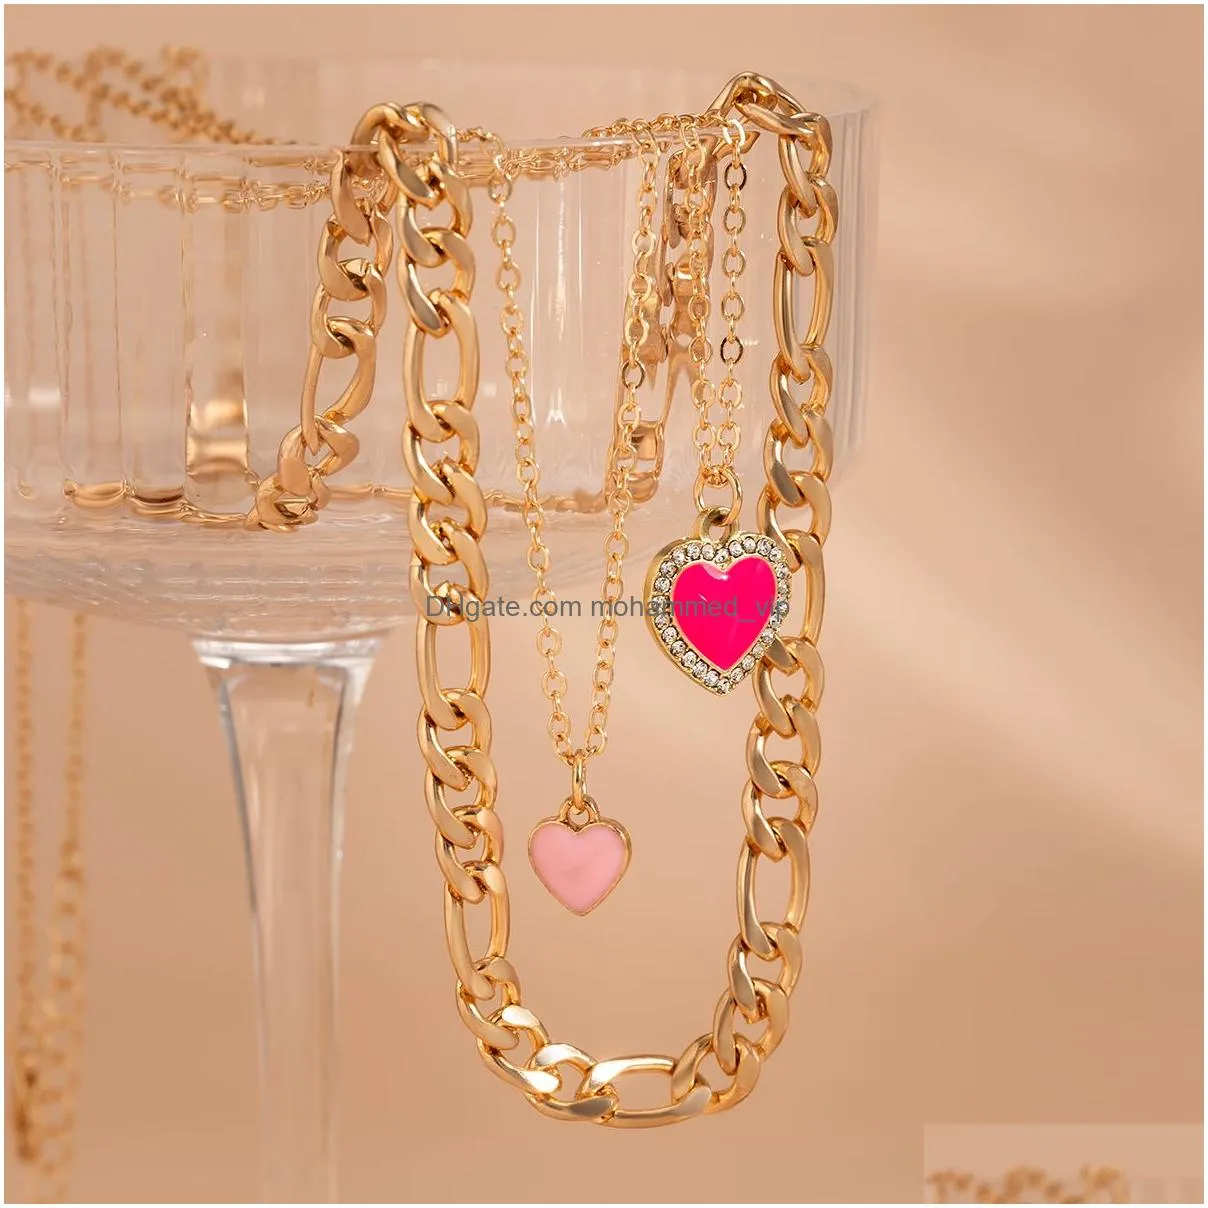 sweet cool pink color love shaped pendant necklace set thickness neck chain stacked for women dating gift creative jewelry